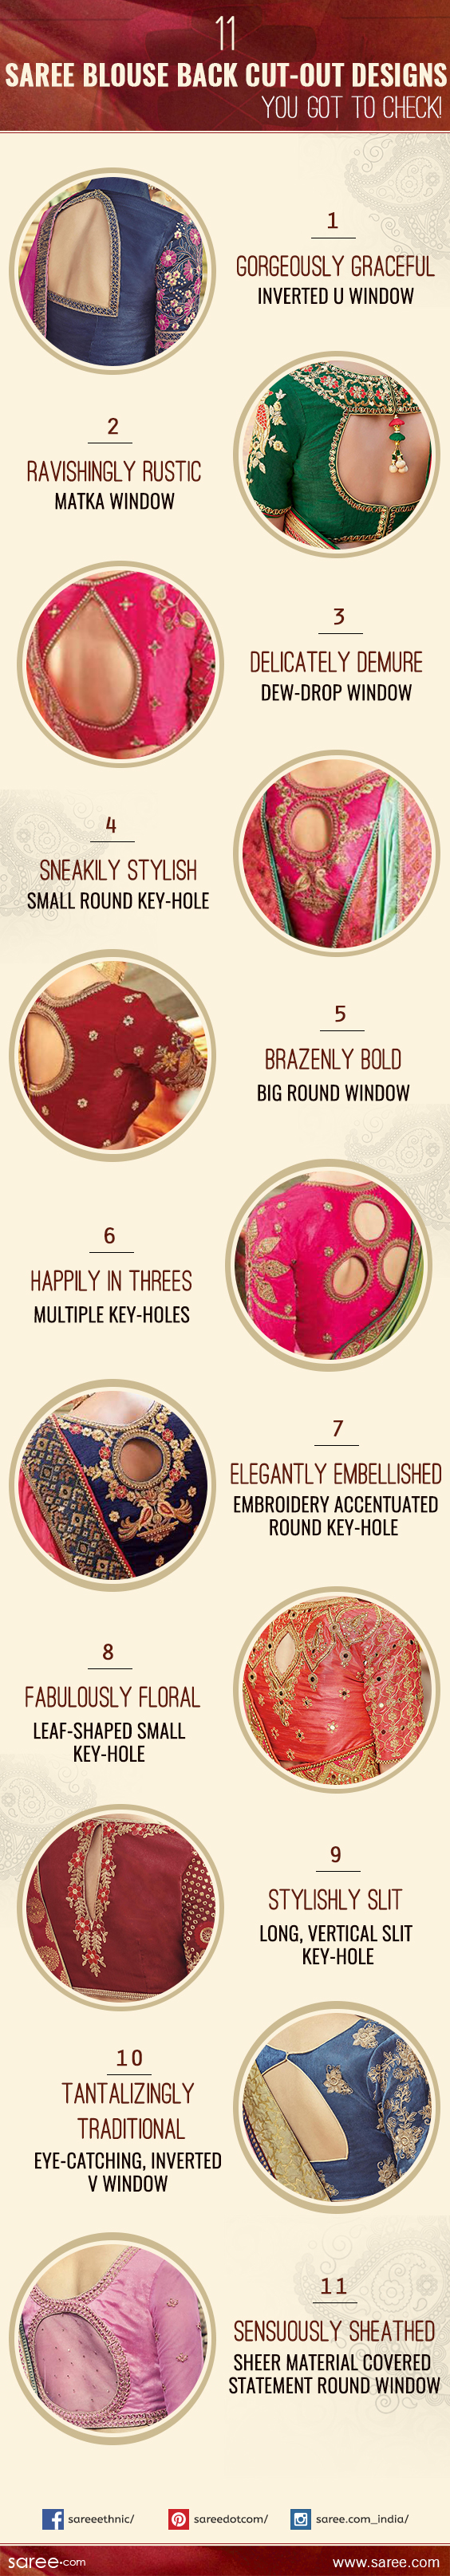 Win The Window Style Latest Saree Blouse Back Designs With Key